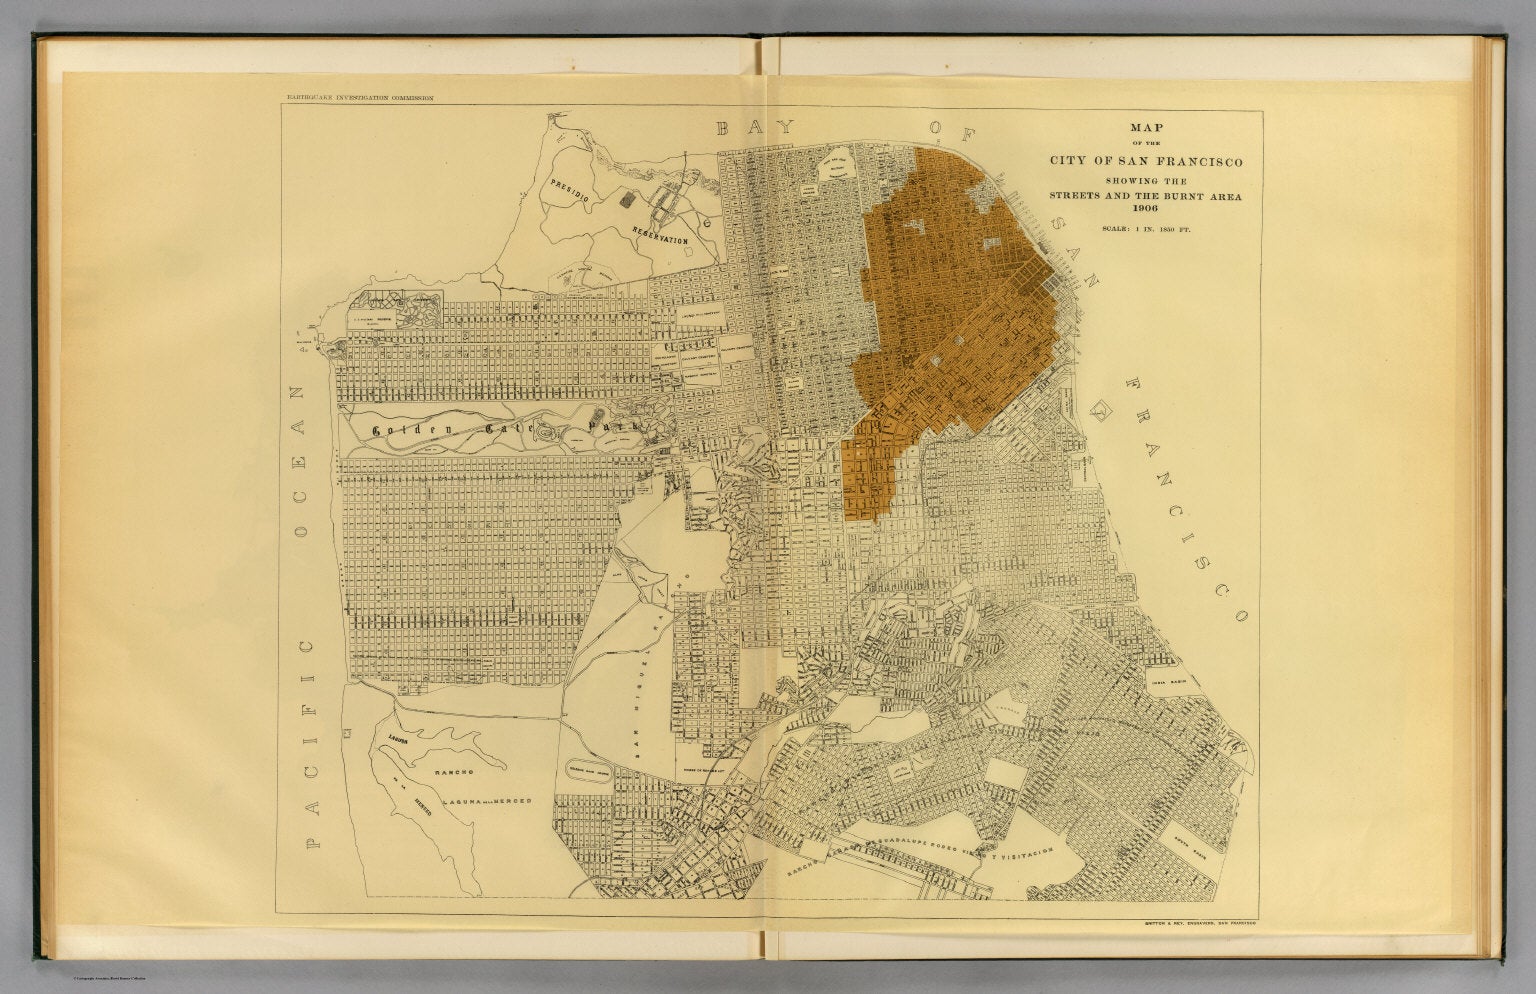 Atlas of Maps and Seismograms Accompanying the Report of the State Earthquake Investigation Commission: Map of the City of San Francisco Showing the Streets and the Burnt Area  1906